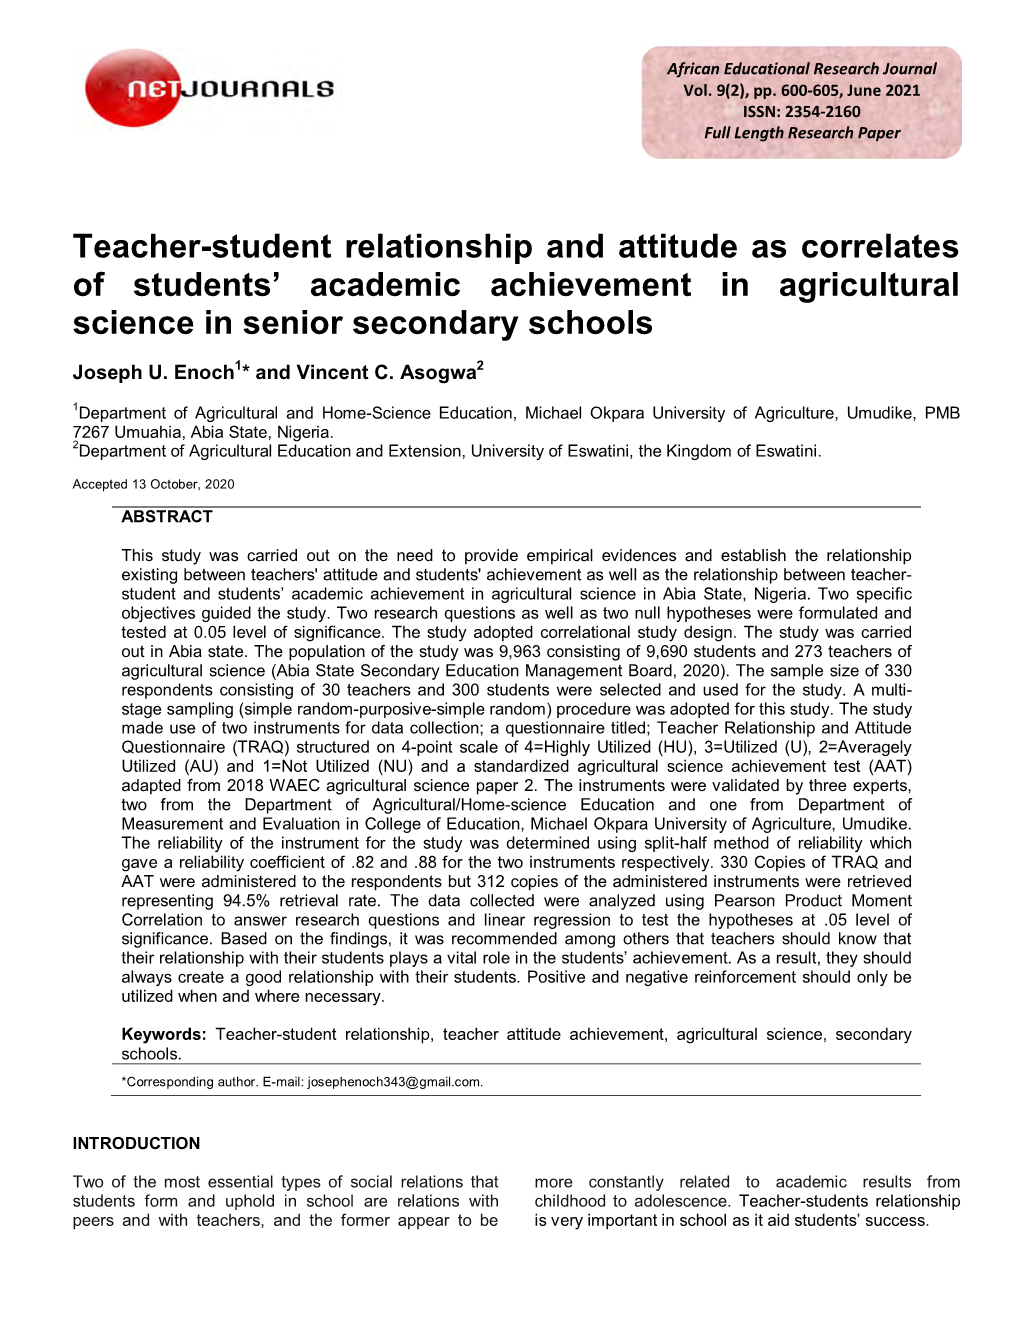 Teacher-Student Relationship and Attitude As Correlates of Students’ Academic Achievement in Agricultural Science in Senior Secondary Schools